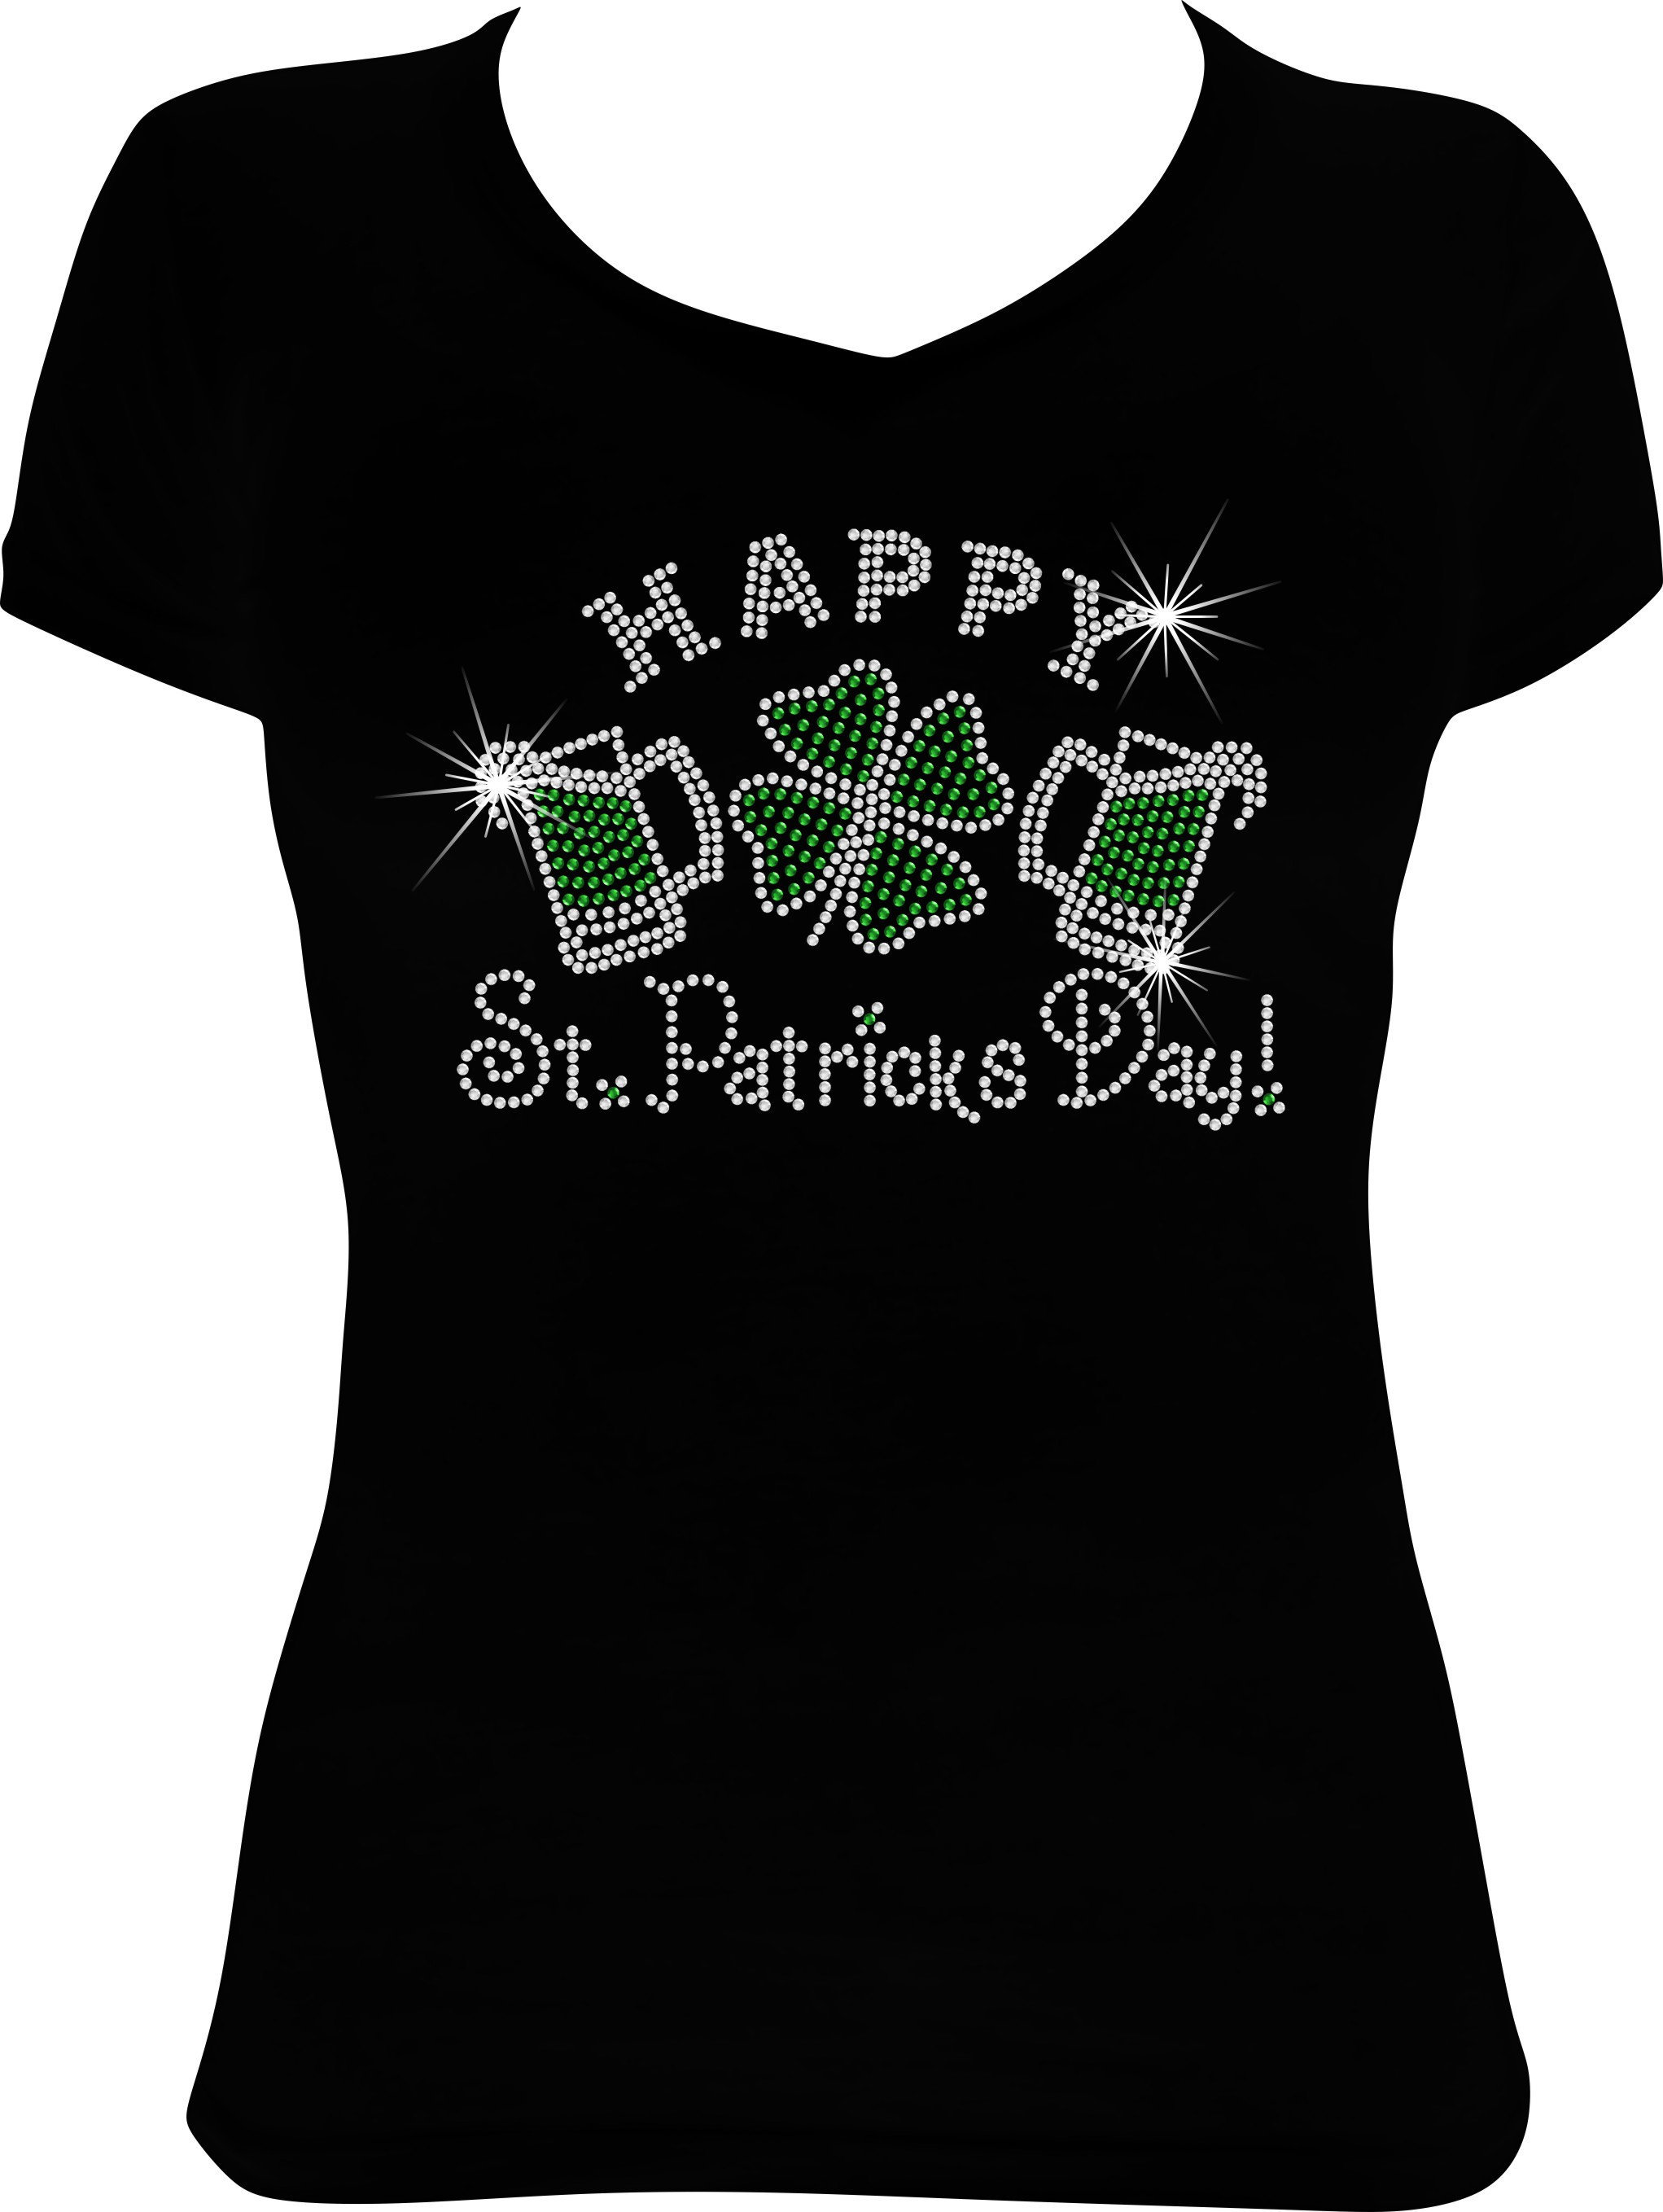 100% polyester shirts St Patricks Day Shirt Women Plus Size Irish Graphic  Tees Funny Lucky Short Sleeve Tshirts Floral Ruffle Blouse ropa deportiva  para mujer 